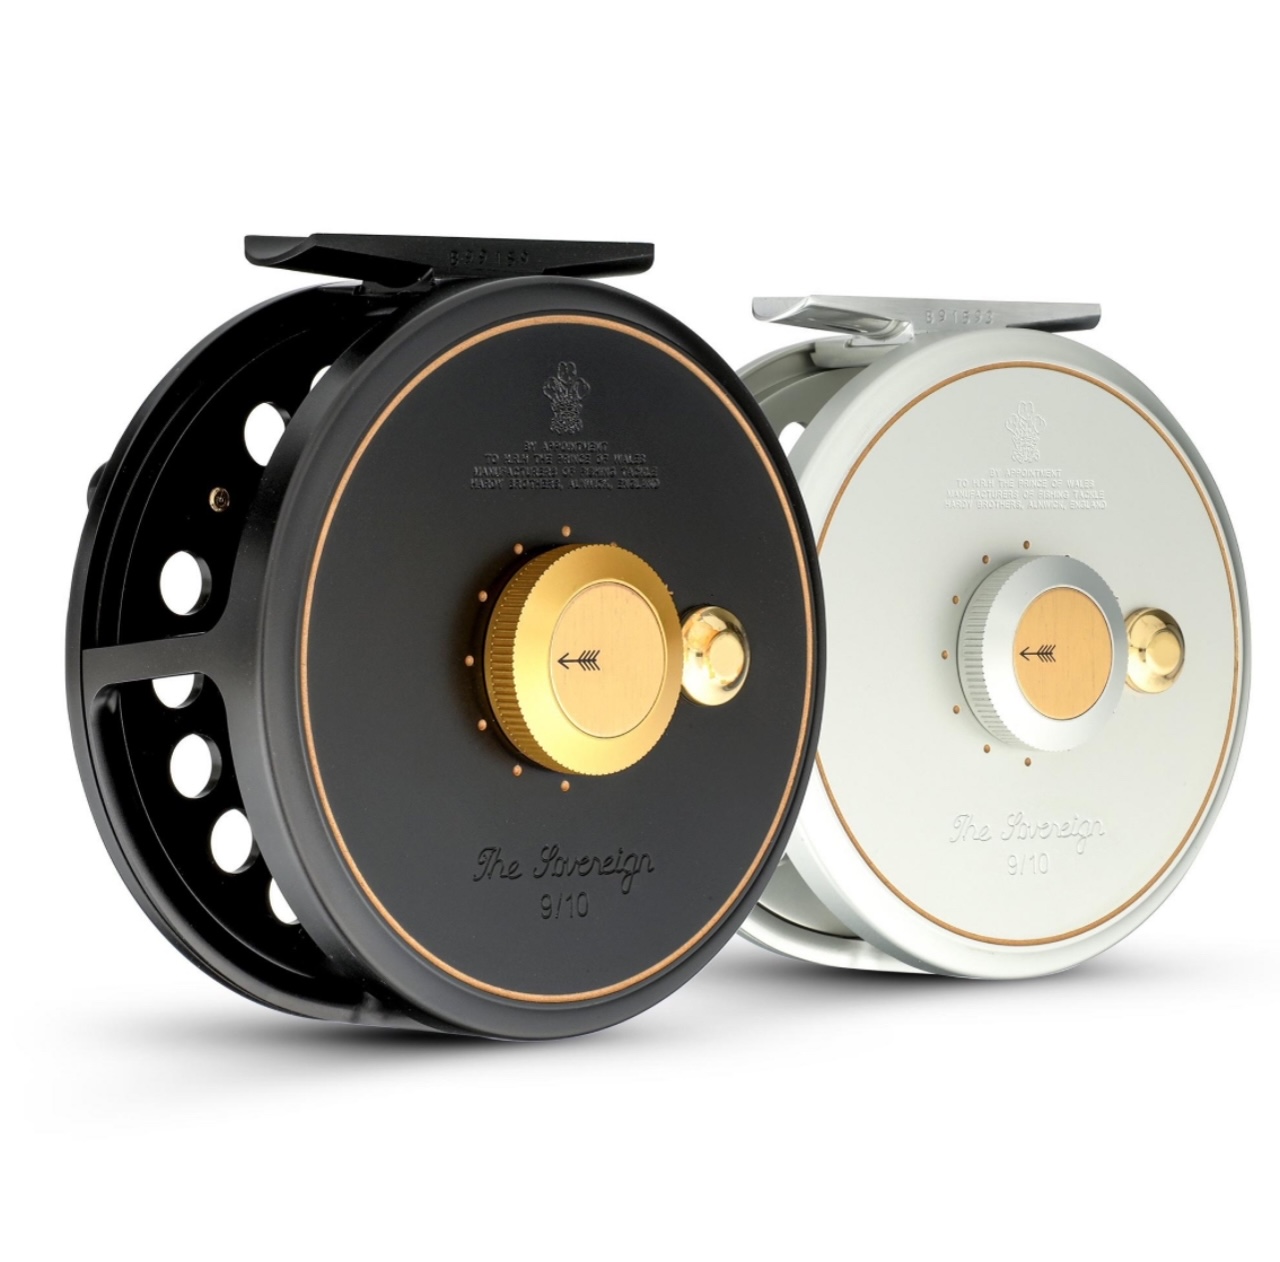 Hardy Sovereign Fly Reel - Spitfire - 9/10